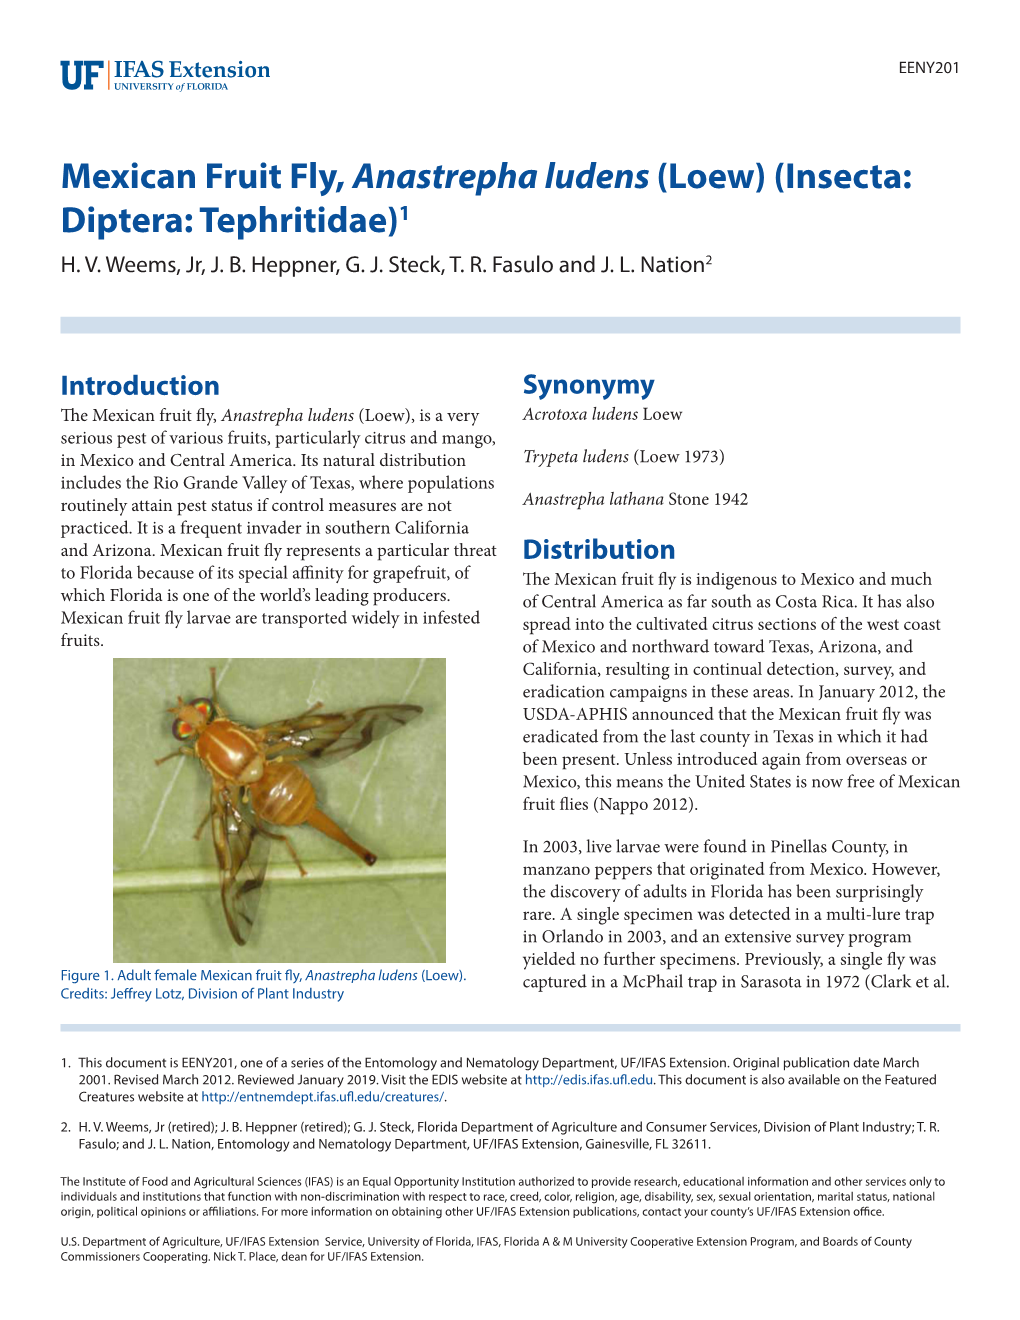 Mexican Fruit Fly, Anastrepha Ludens (Loew) (Insecta: Diptera: Tephritidae)1 H